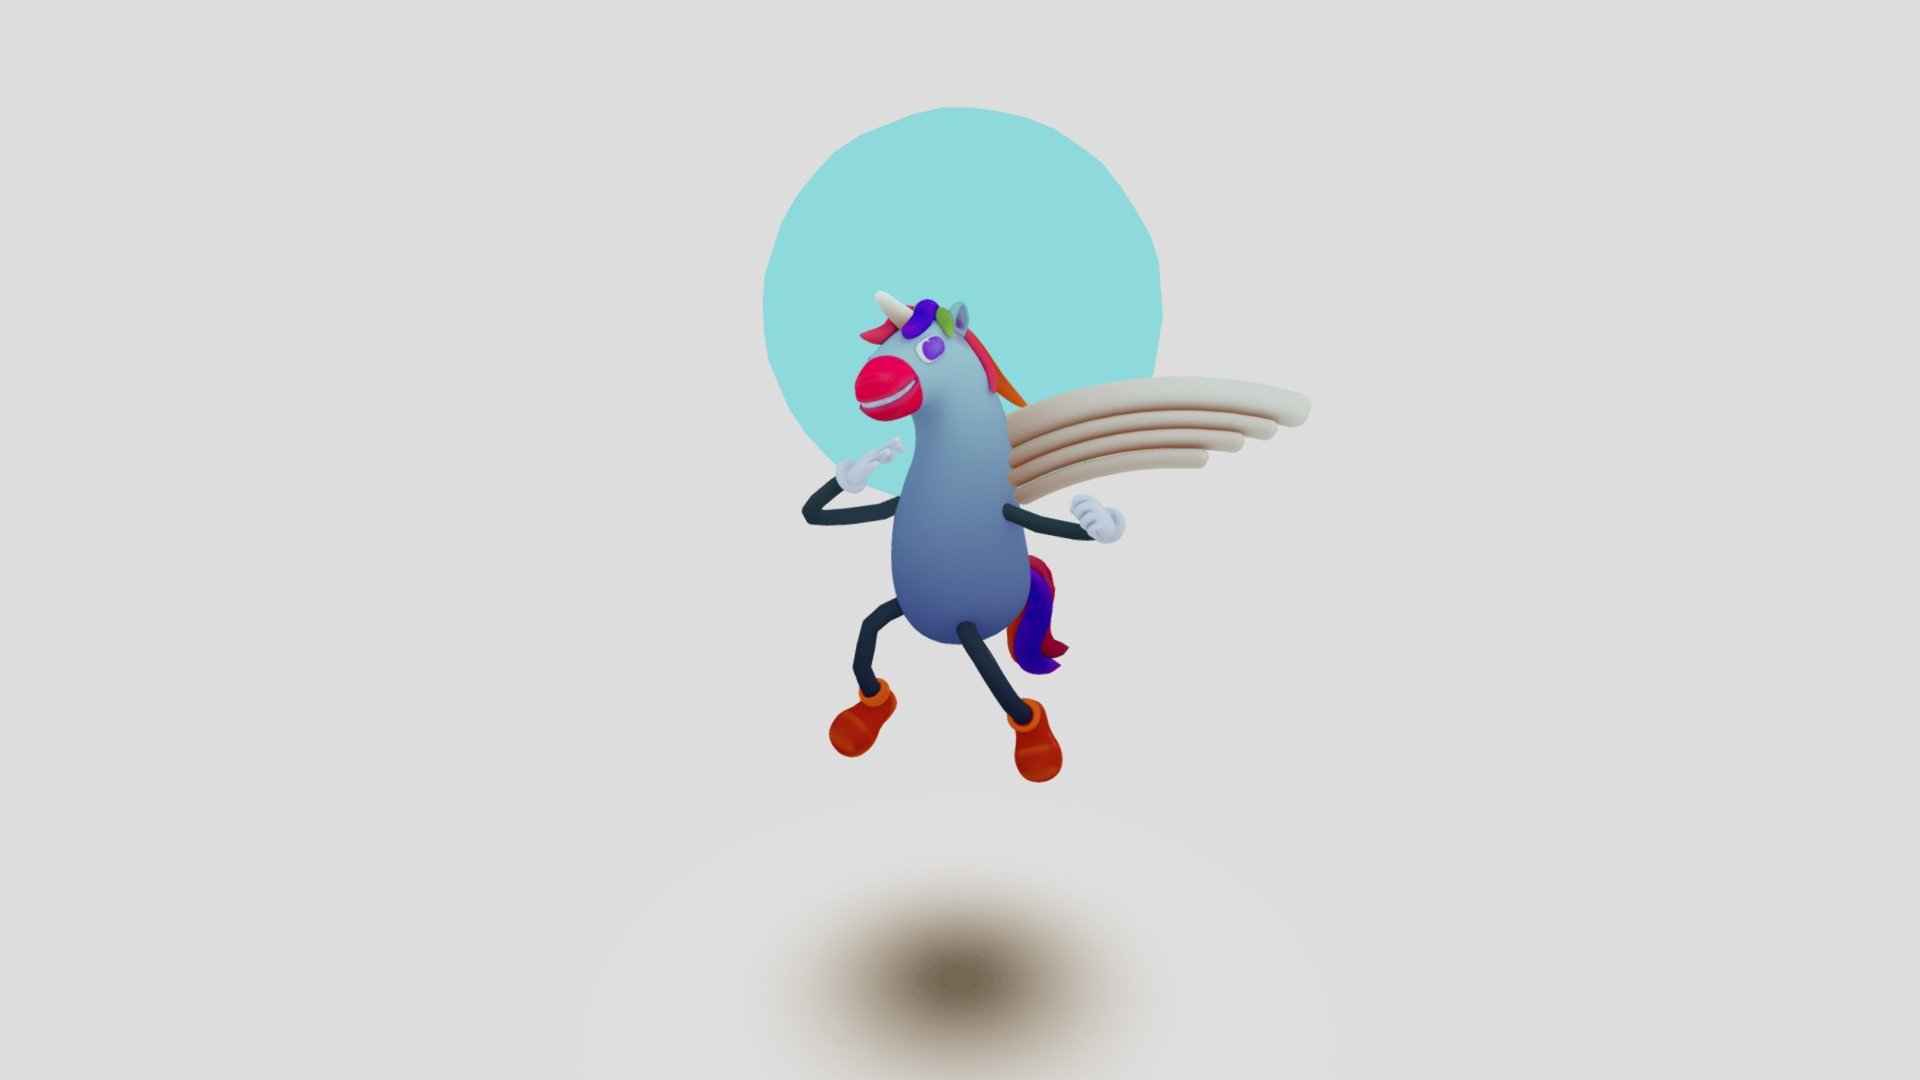 Unicorn is a character from https://skfb.ly/oLxUt




You can buy the characters and use them in your projects!
Mushrooman



https://skfb.ly/oLyQ9

Cute Worm

https://skfb.ly/oLyQG

Cute Peacock

https://skfb.ly/oLyVK

Happy Flower

https://skfb.ly/oLzps

Time to play

https://skfb.ly/oLzB6

Pipe

https://skfb.ly/oLzLn

Afternoon with friends

https://skfb.ly/oLzN6
 - Unicorn - Buy Royalty Free 3D model by msanjurj 3d model